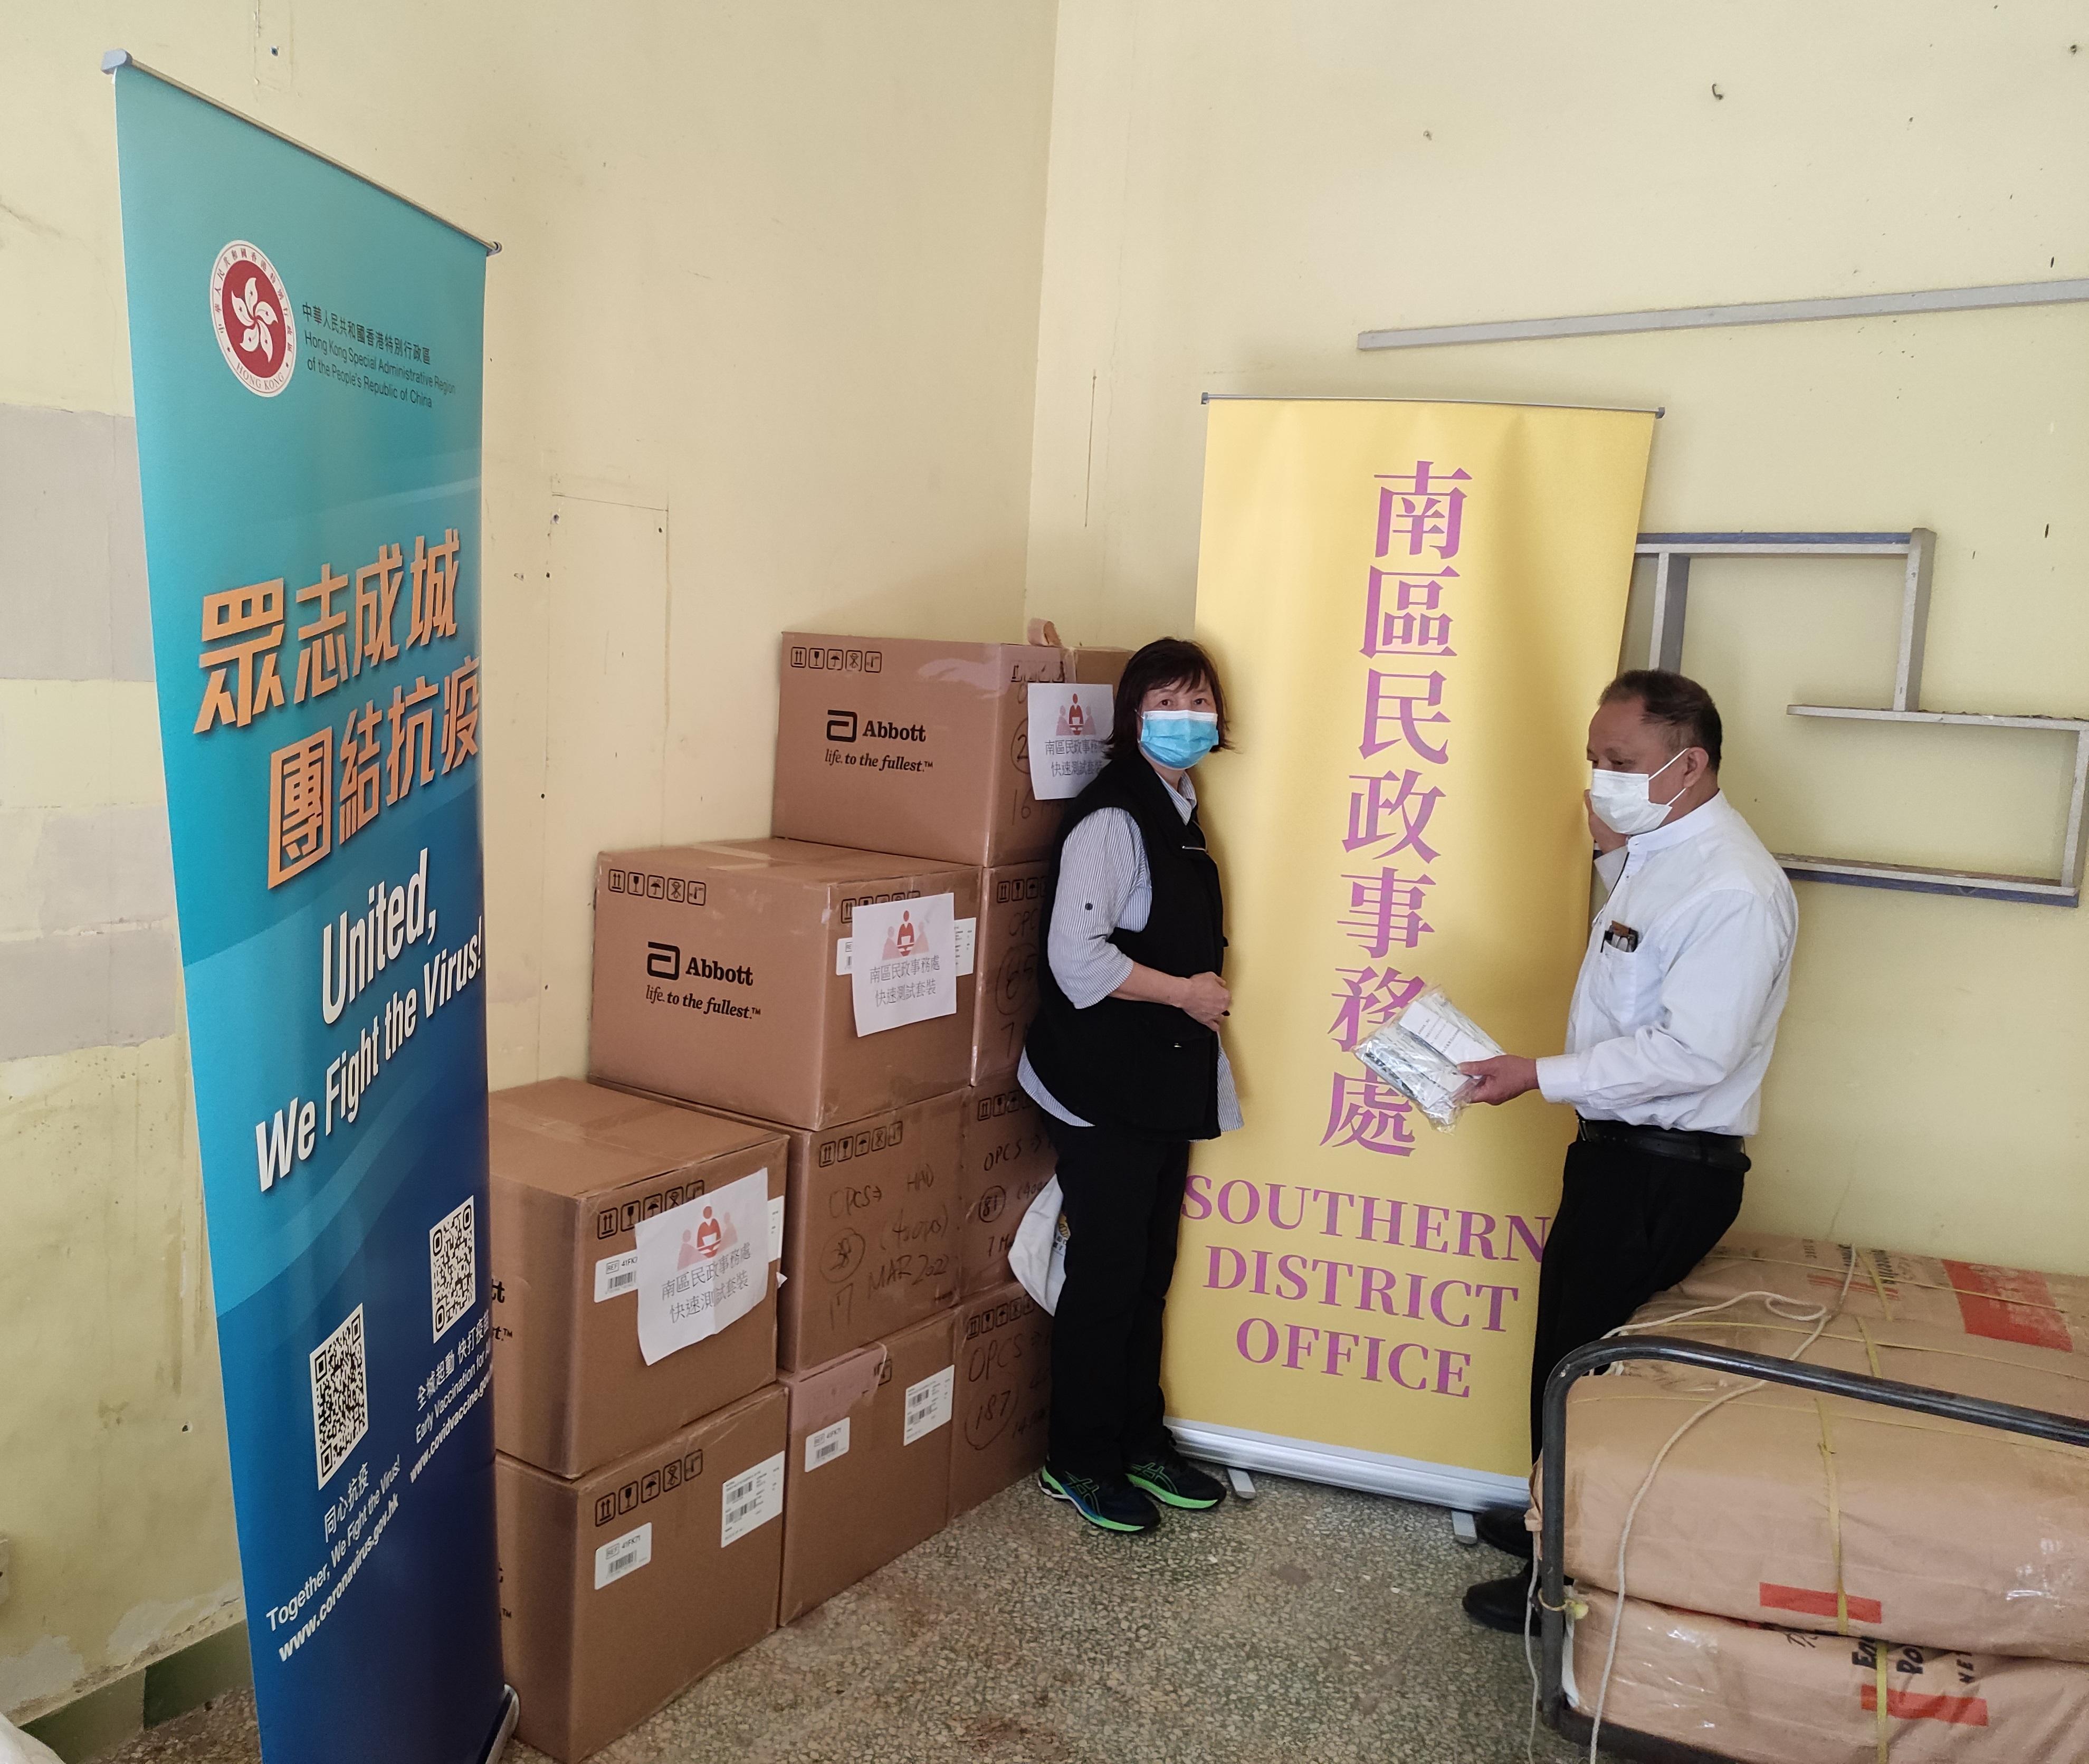 The Southern District Office today (April 20) distributed COVID-19 rapid test kits to households, cleansing workers and property management staff living and working in Lei Tung Estate for voluntary testing through the property management company.